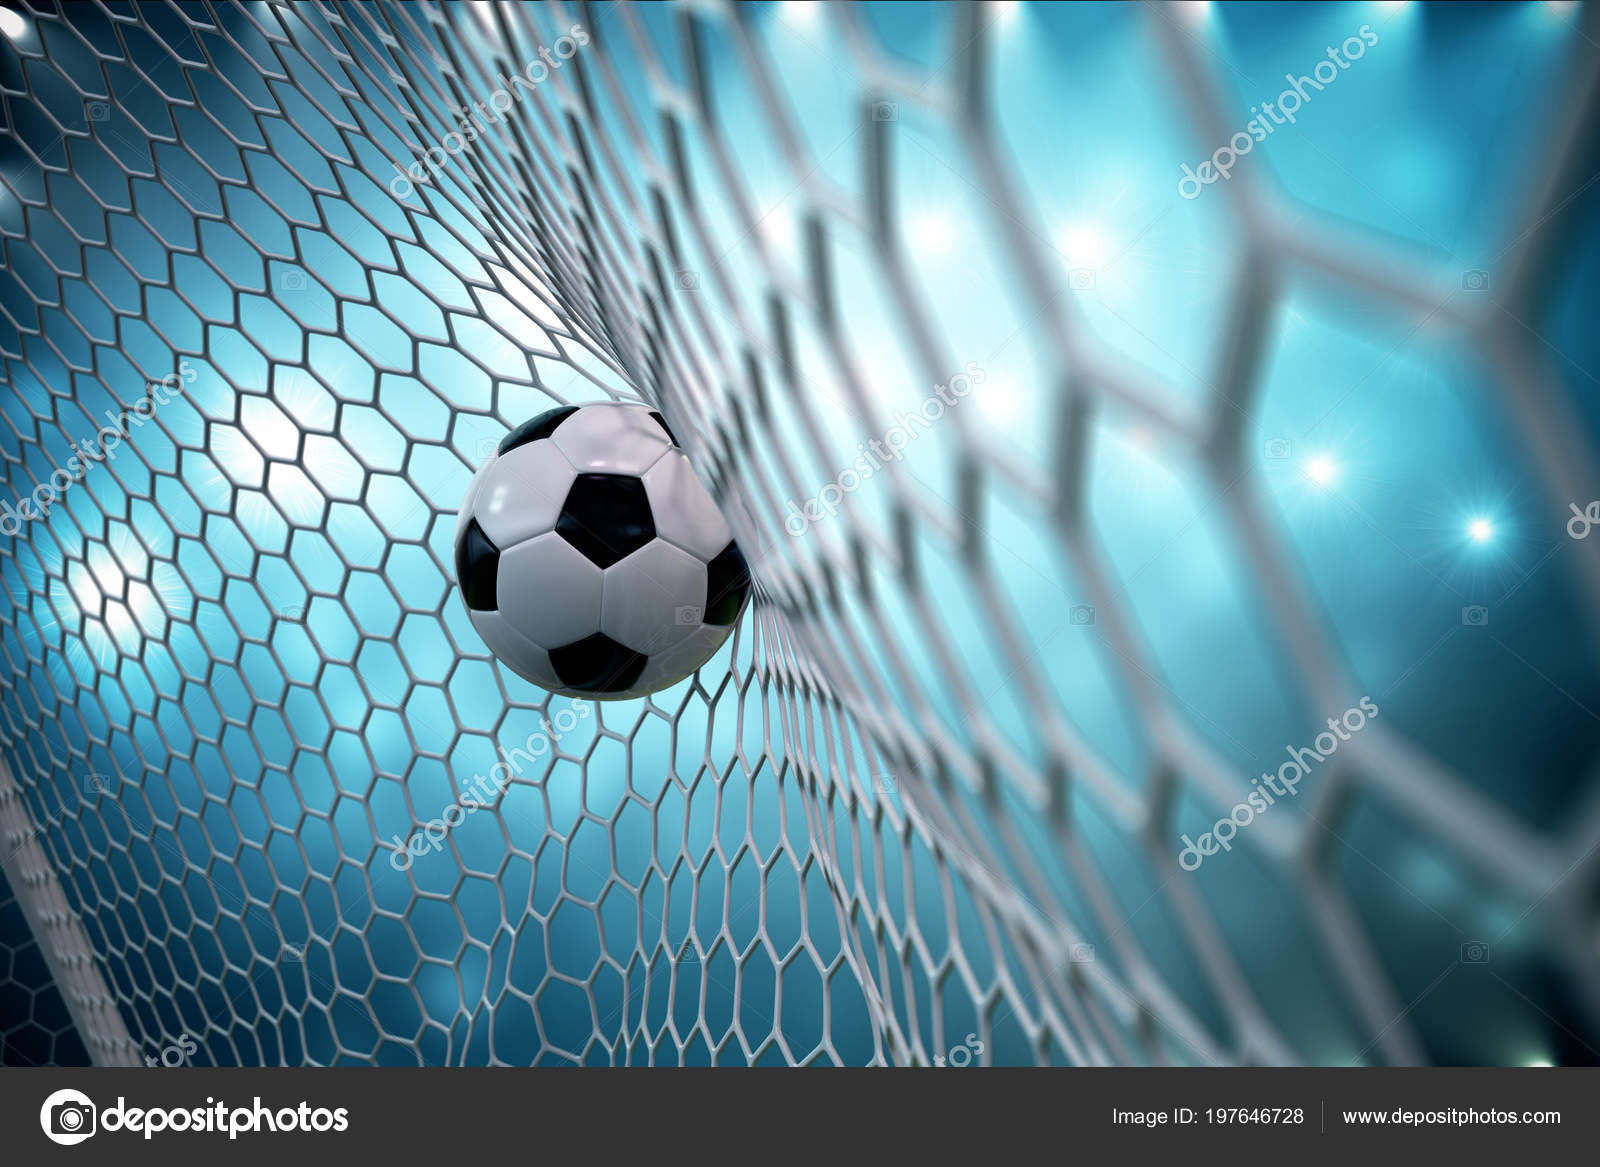 3d Rendering Soccer Ball In Goal Soccer Ball In Net With Spotlight And Stadium Light Background Success Concept Soccer Ball On Blue Background Stock Photo By C Rost9